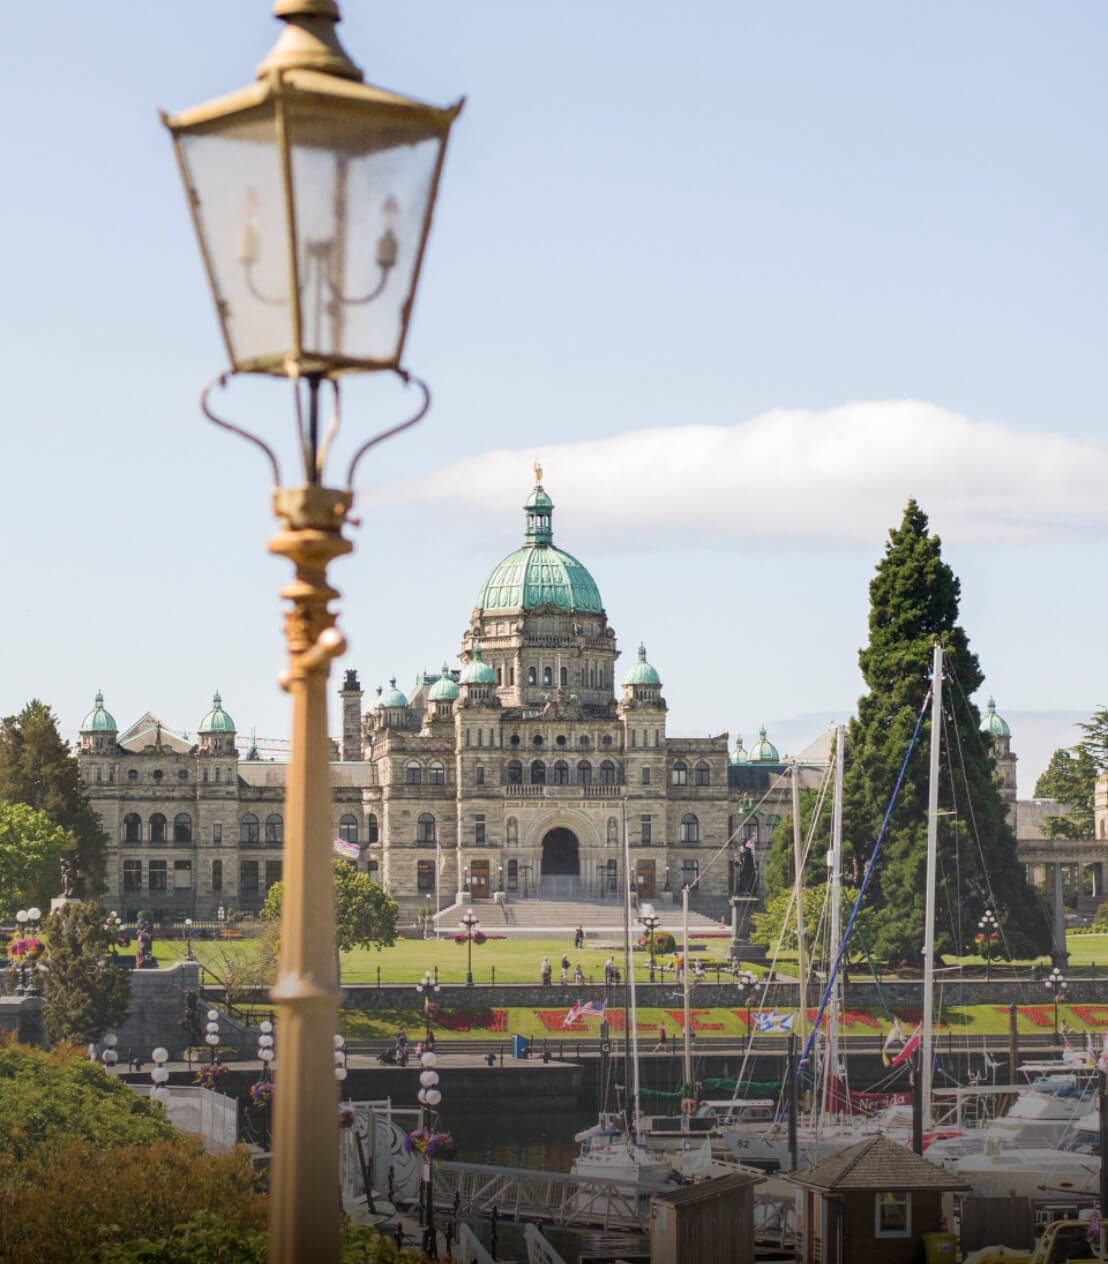 Photo of the Parliament buildings in downtown Victoria